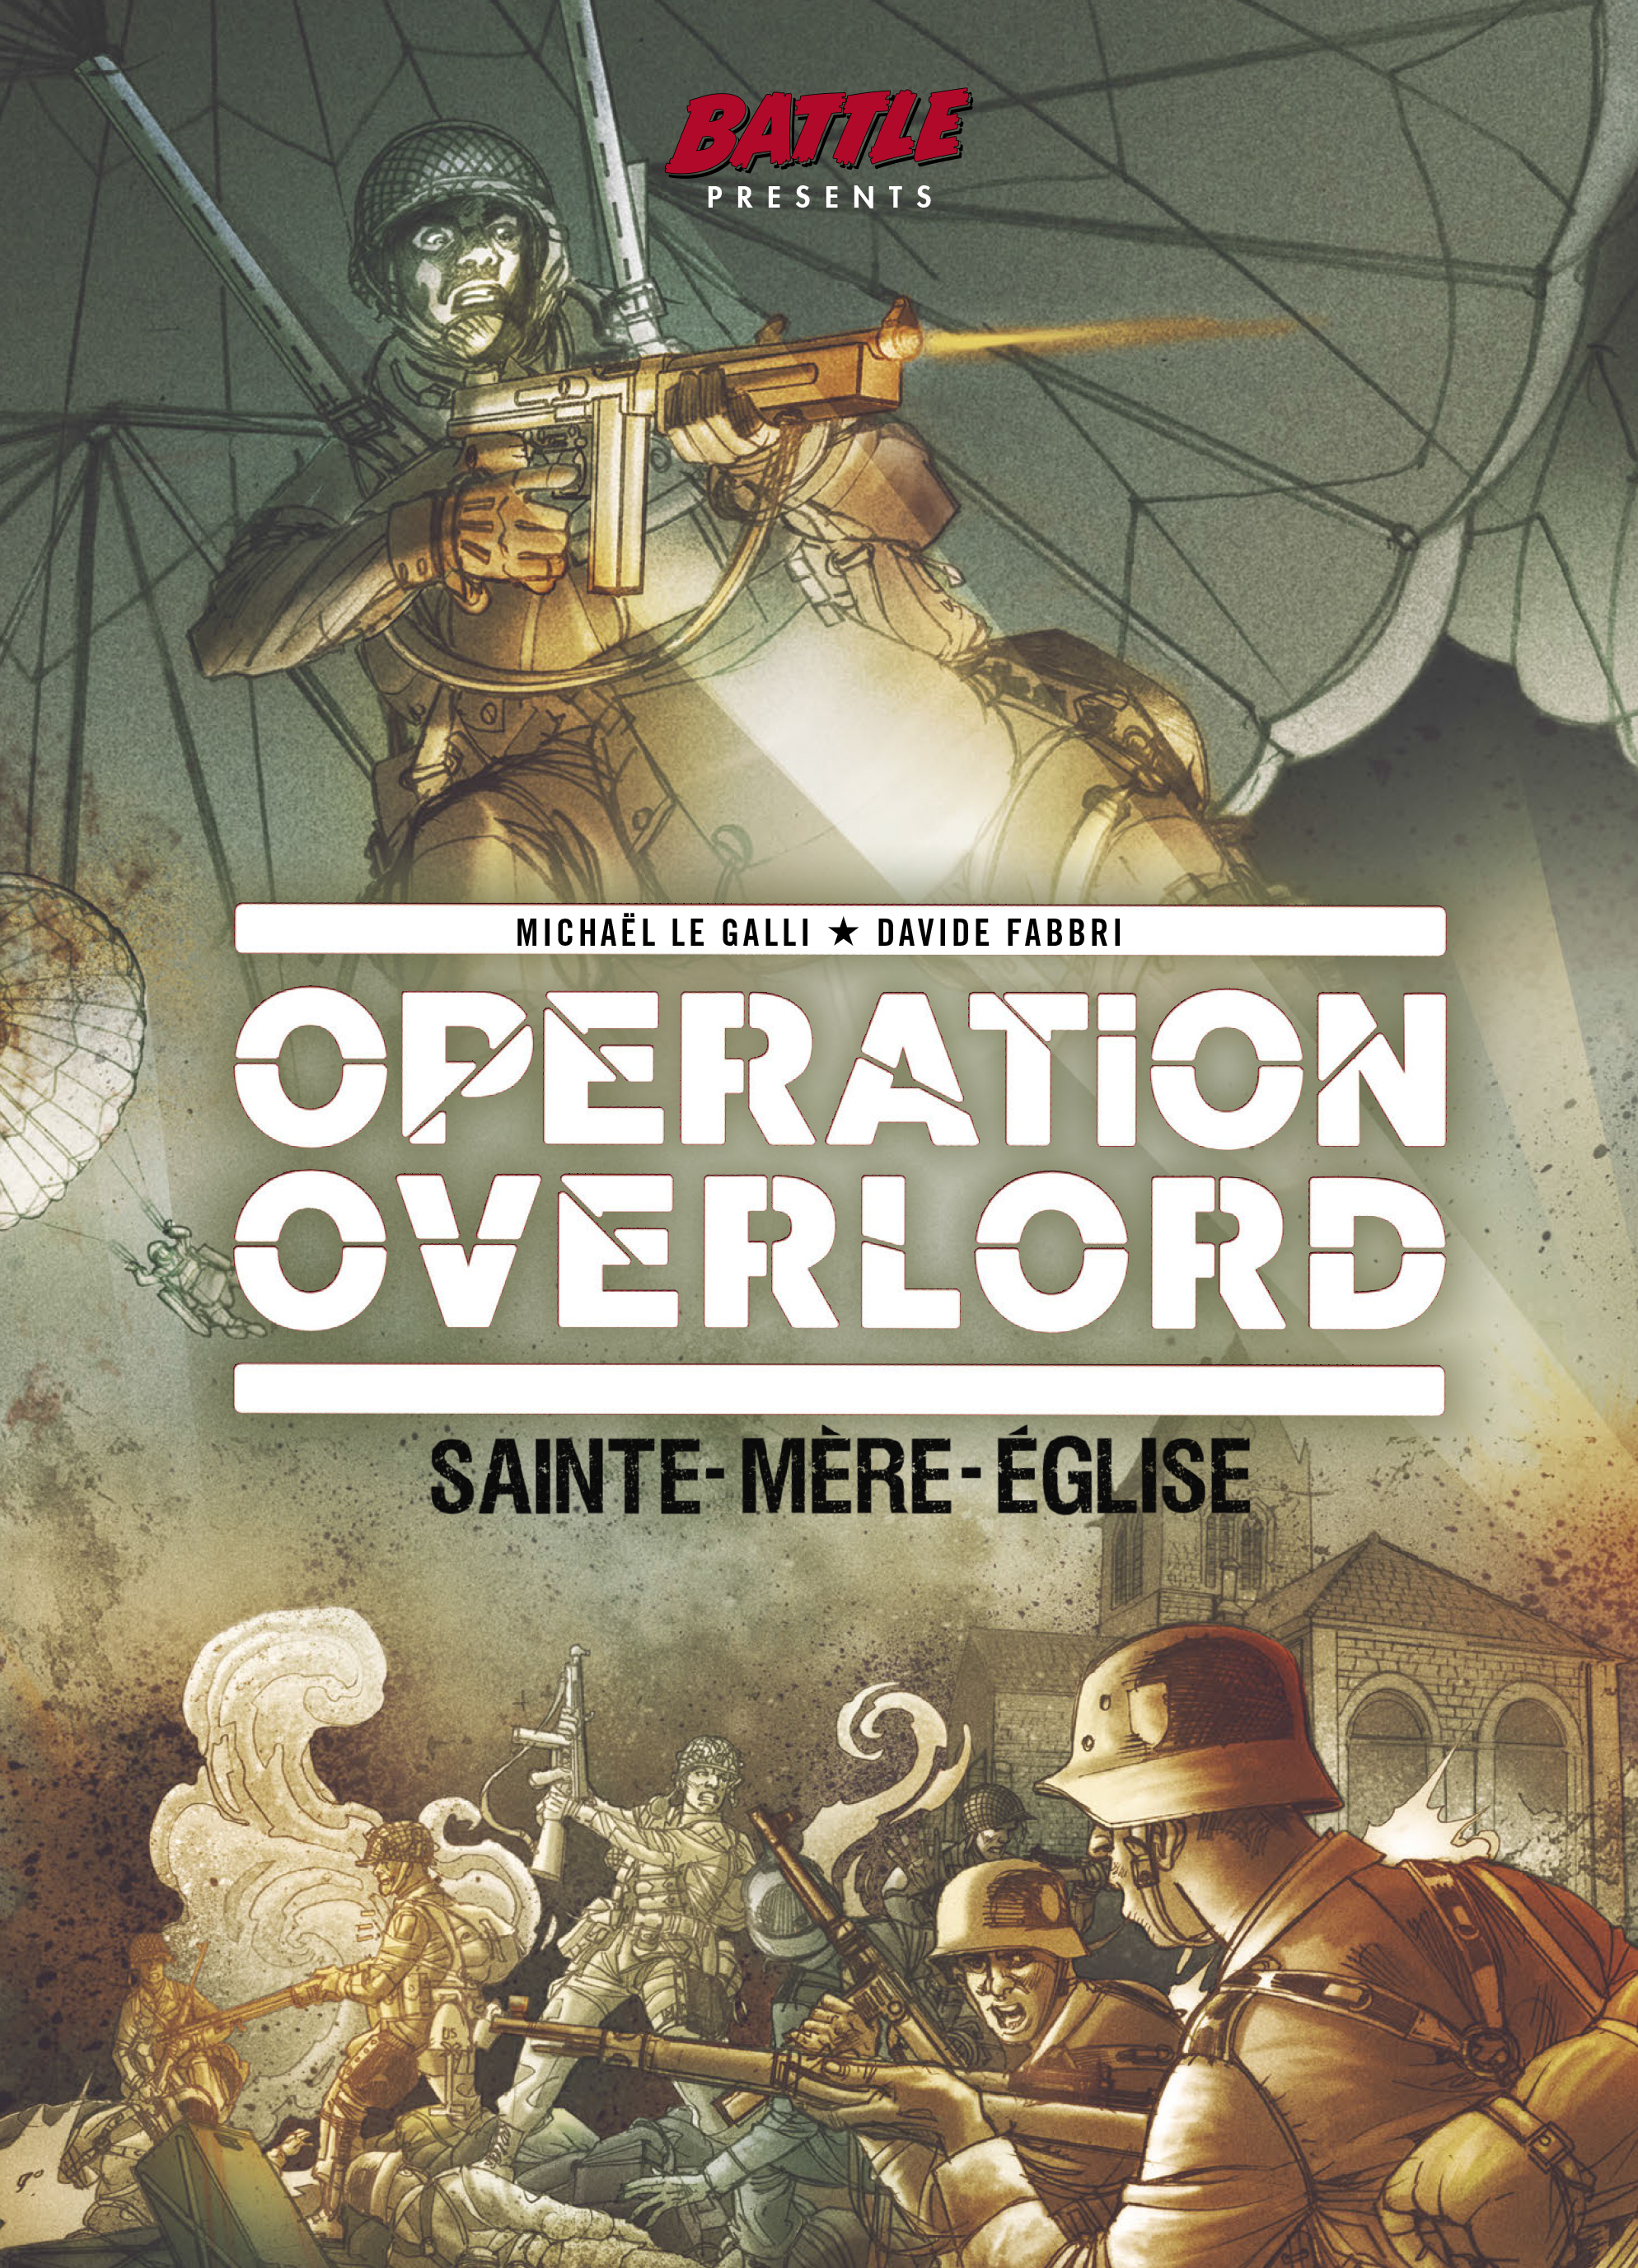 Read online Opération Overlord comic -  Issue #1 - 1